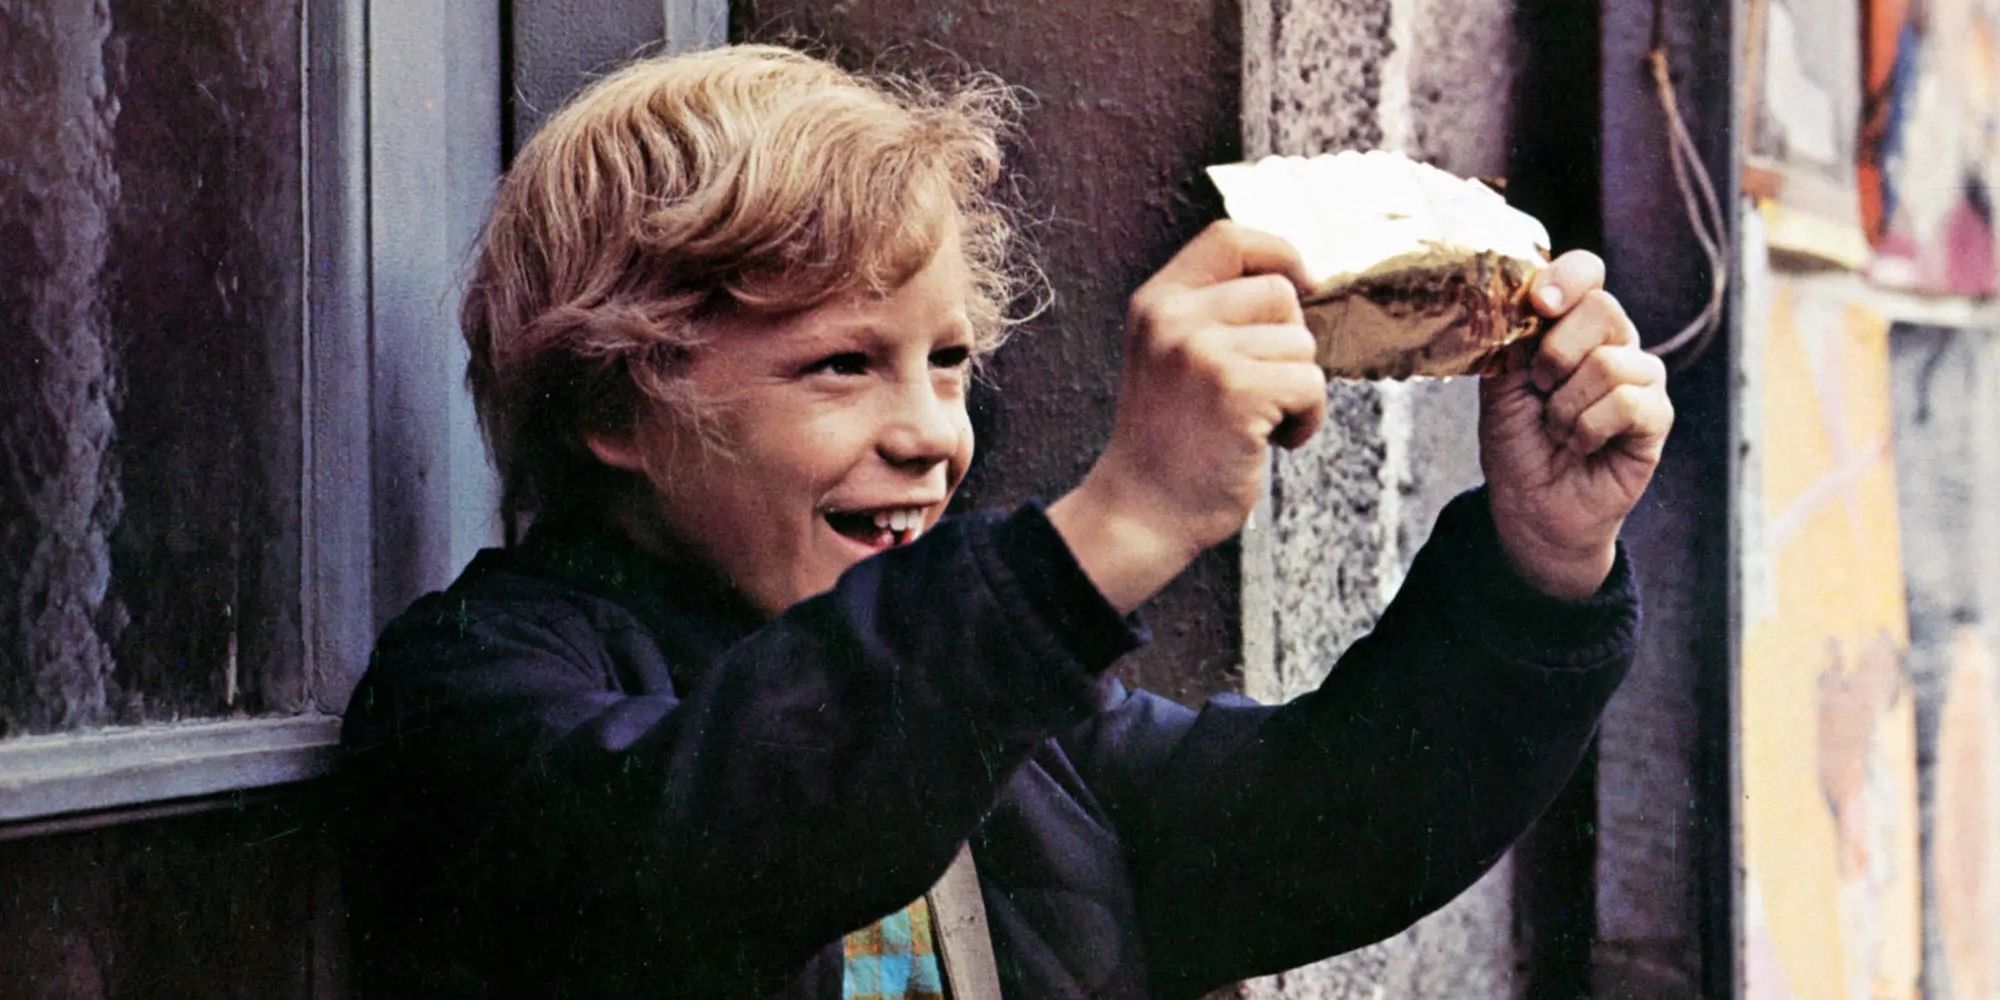 Peter Ostrum as Charlie Bucket holding up a Golden Ticket in Willy Wonka & The Chocolate Factory